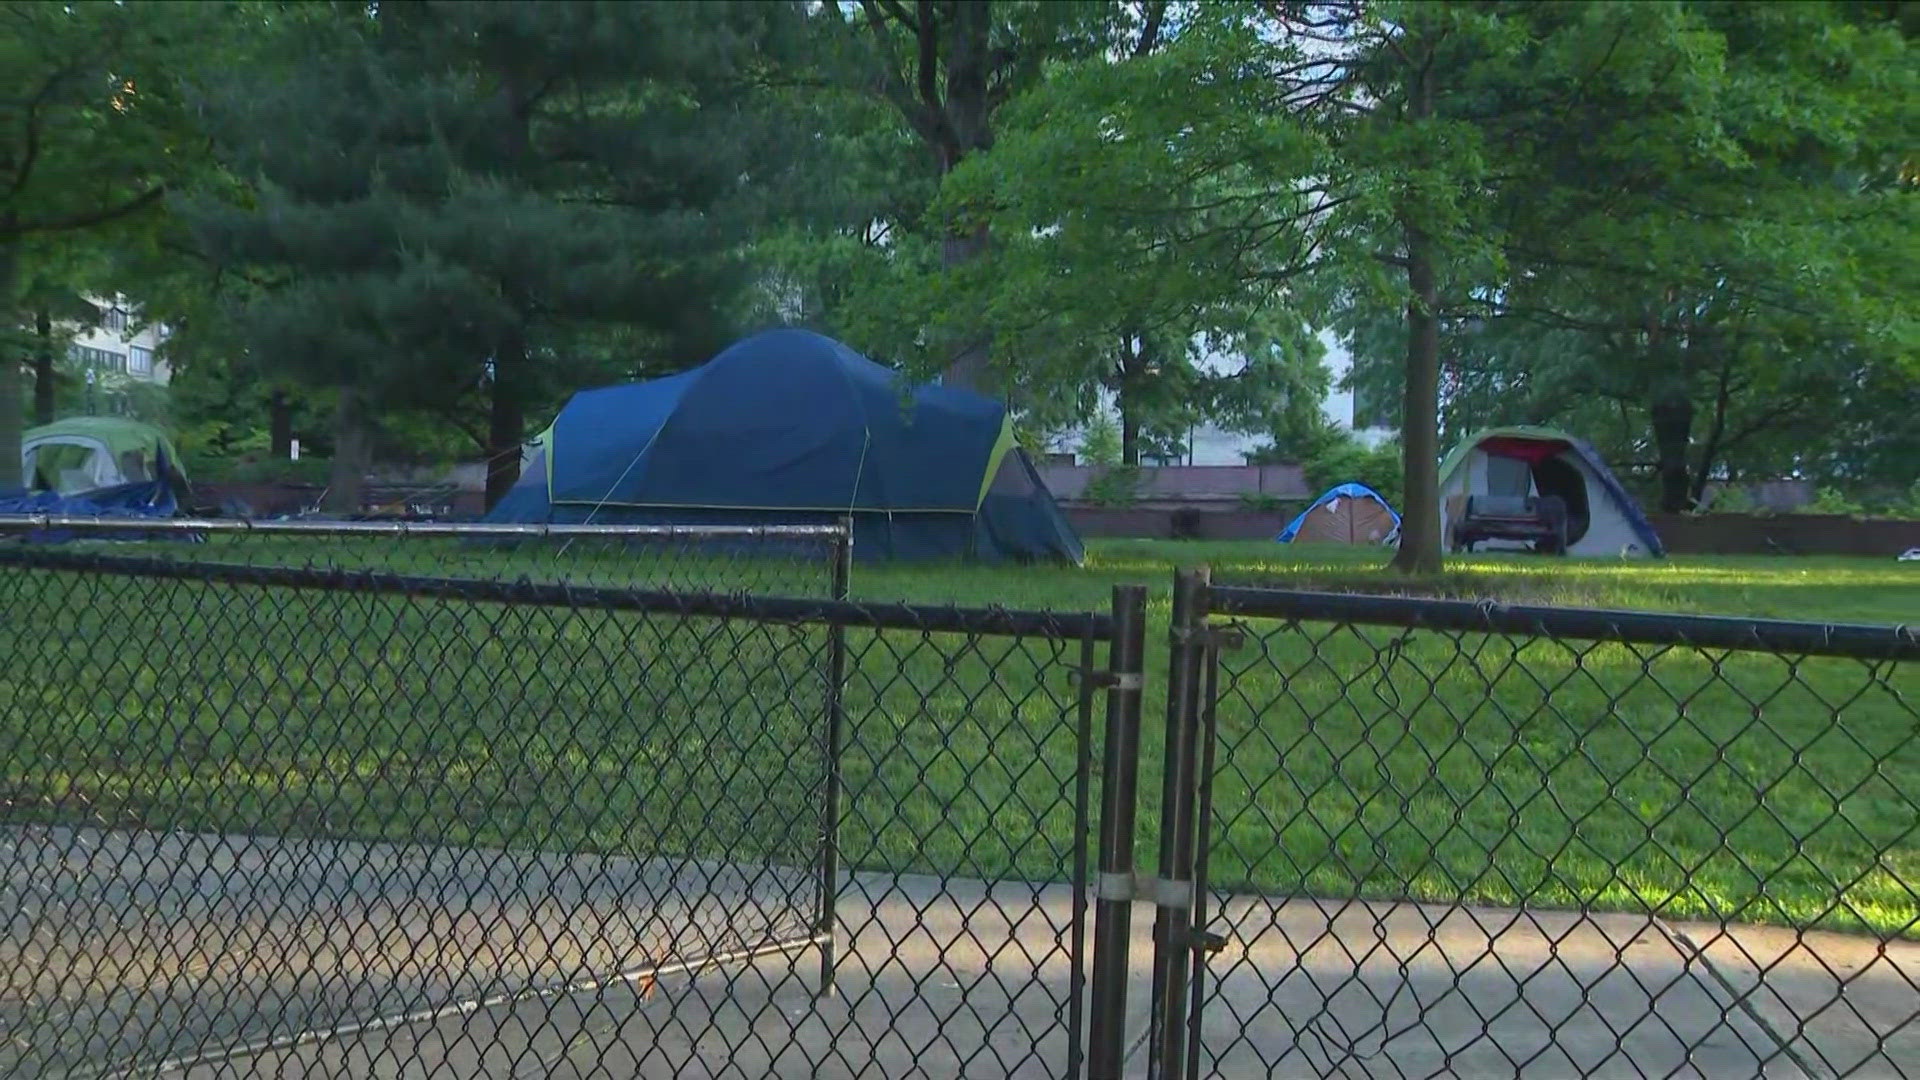 Officials say the encampment clean-up is in advance of the 4th of July weekend.